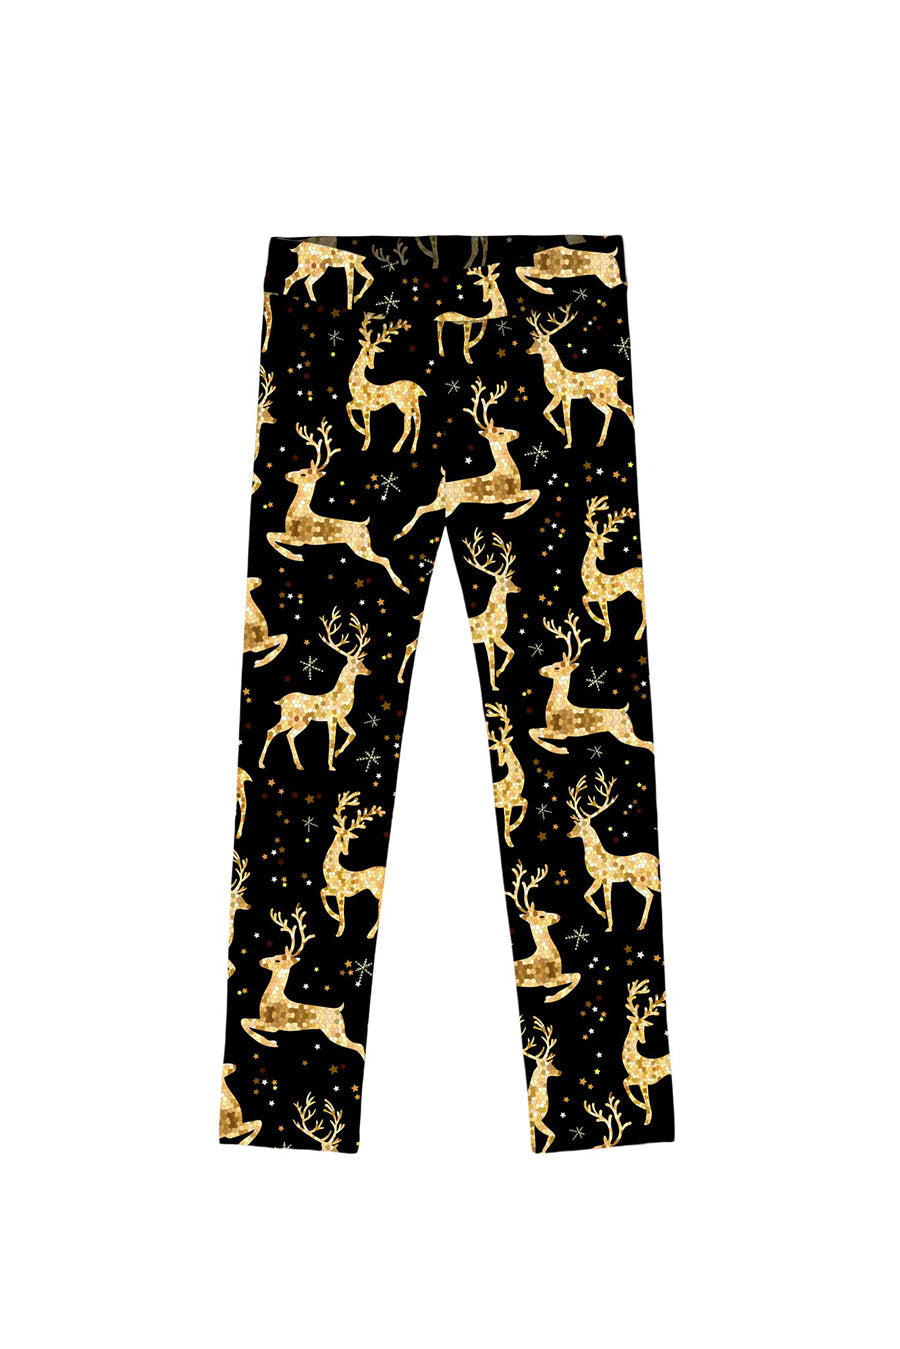 Holly Jolly Lucy Black & Gold Animal Printed Festive Leggings - Kids - Pineapple Clothing